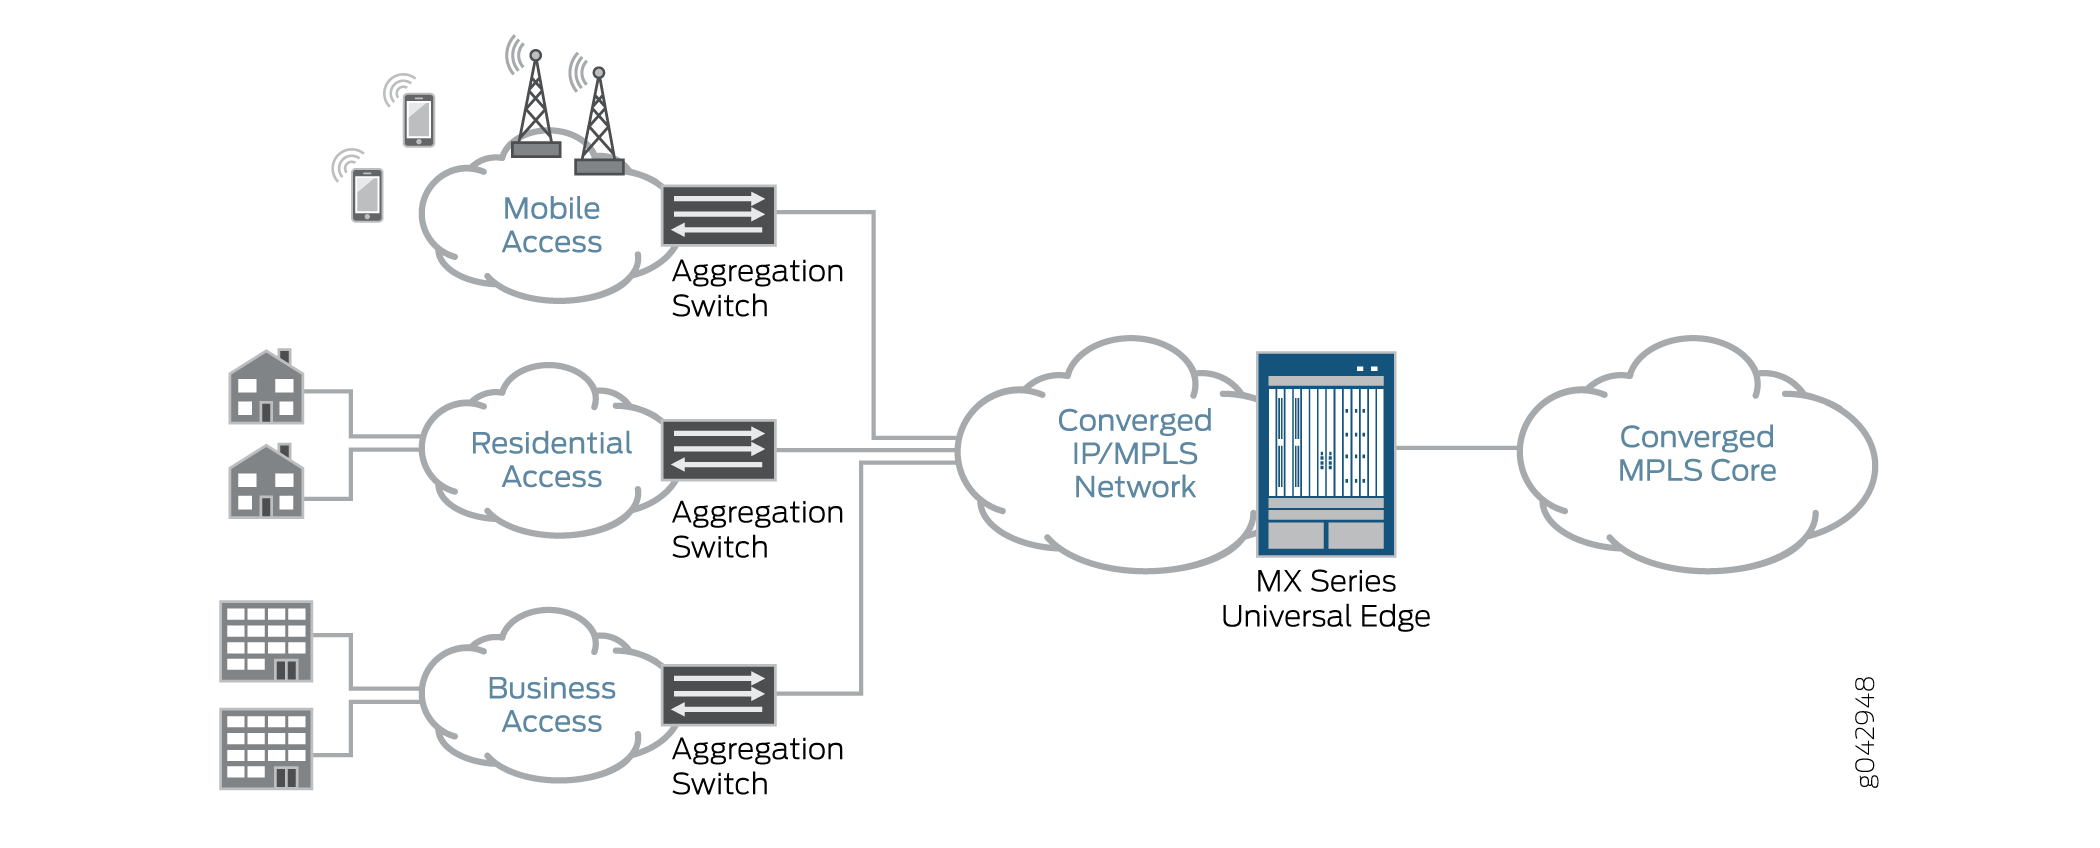 Network Convergence with Seamless MPLS